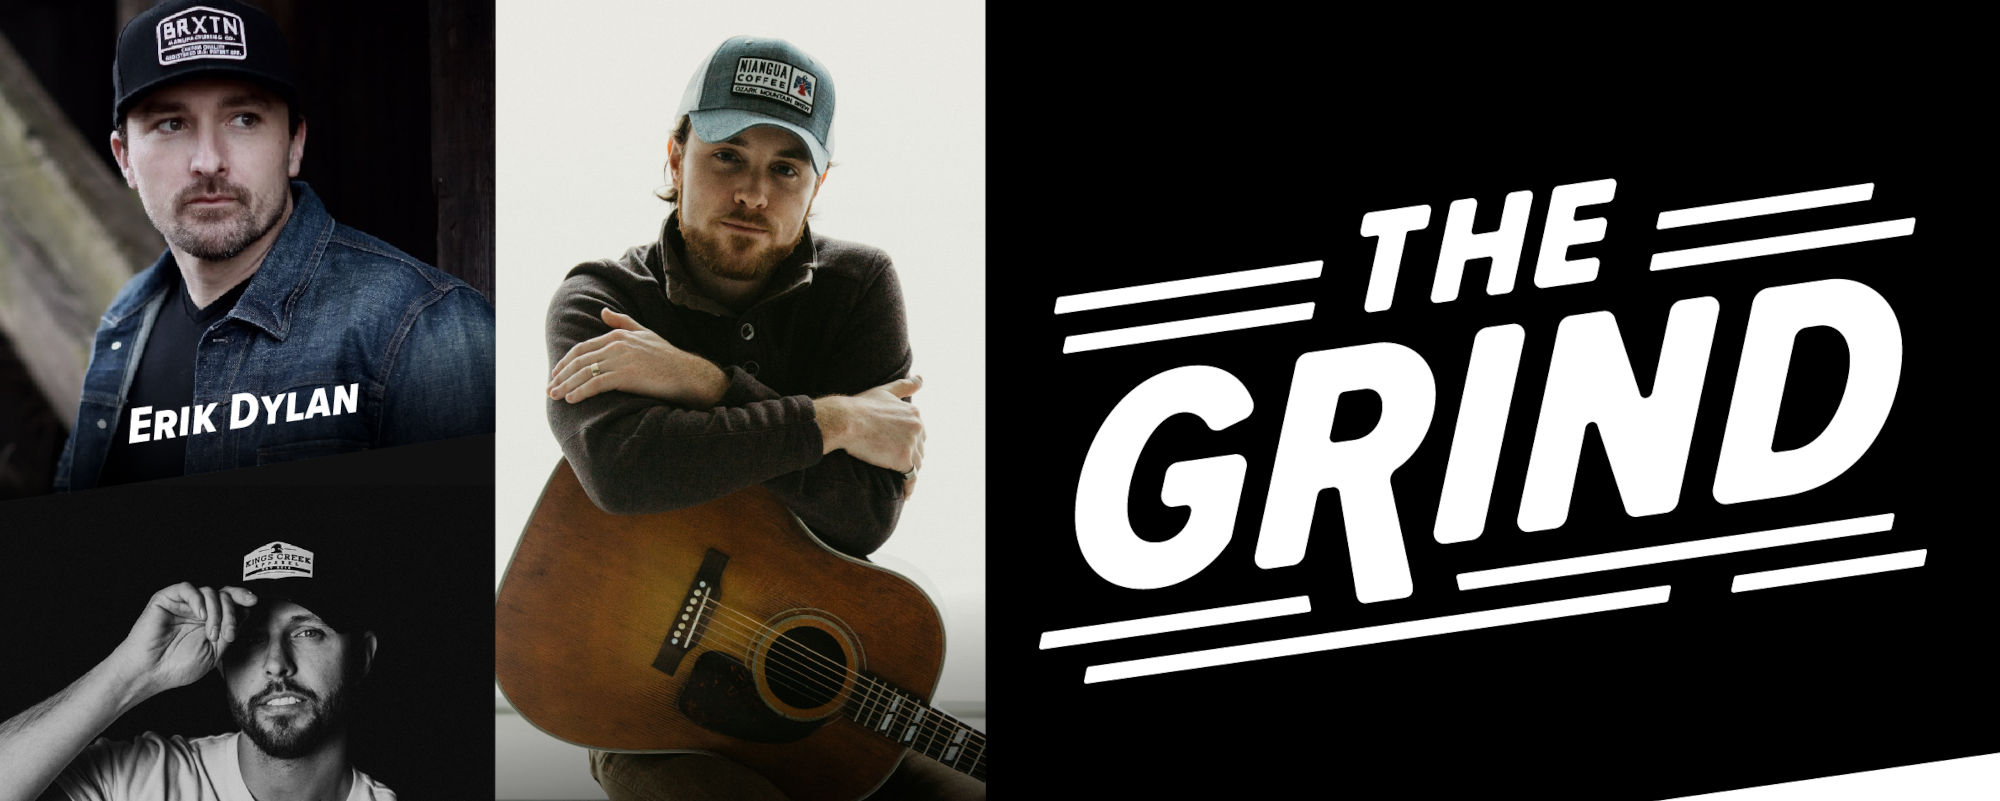 American Songwriter Twitch Series, ‘The Grind’ Live, Debuts with 3 Songwriters